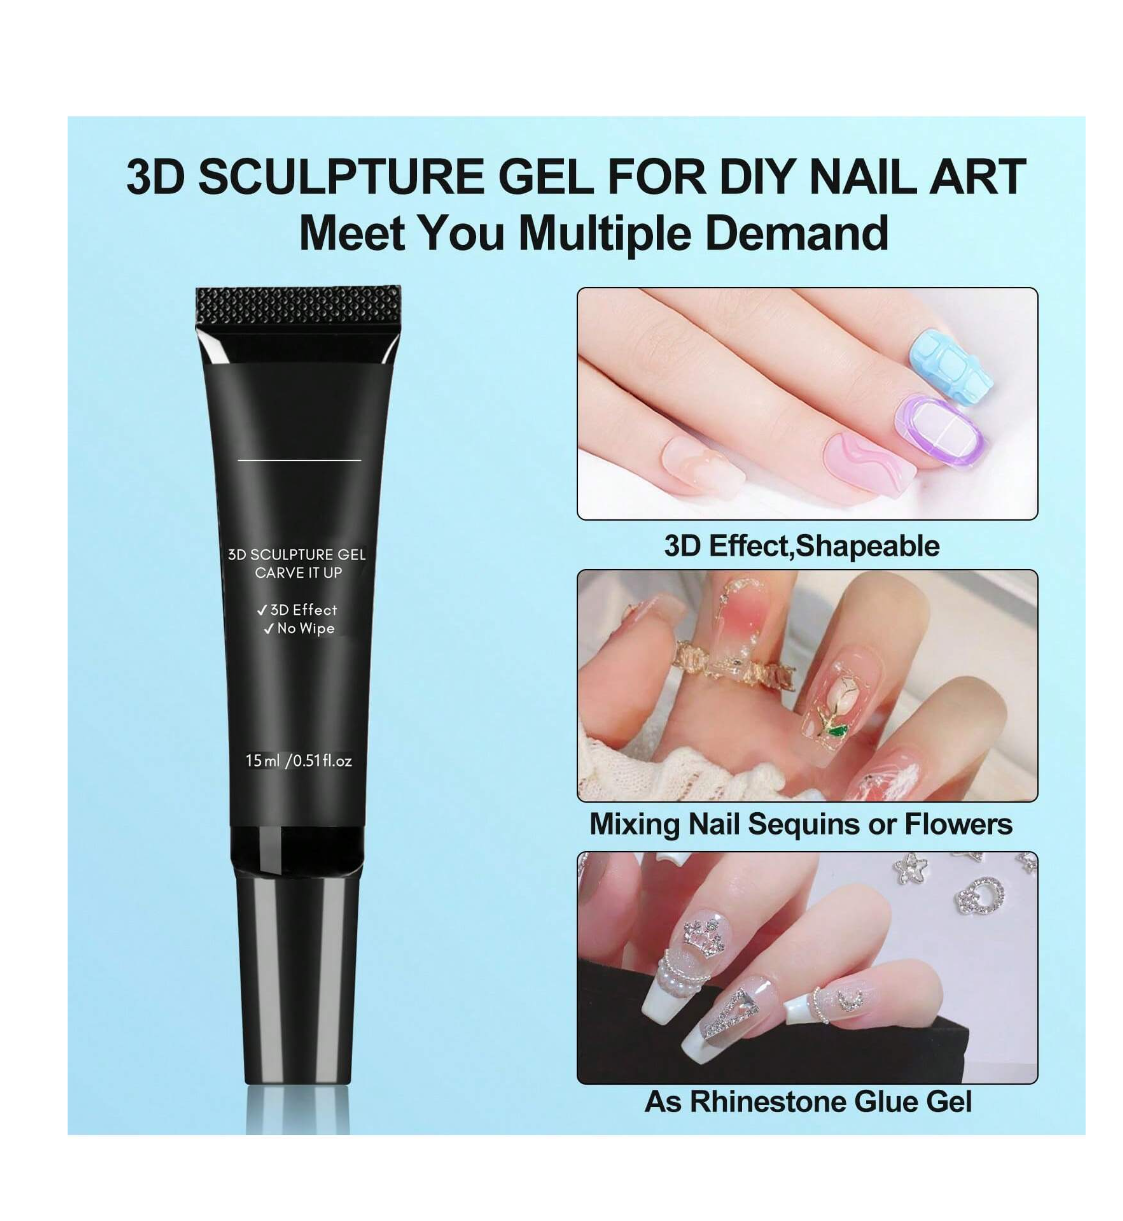 Glamify Your Nails: 15g 3D Nail Gel - Your Ultimate DIY Nail Art Solution for Sculpting, Designing, and Shaping!